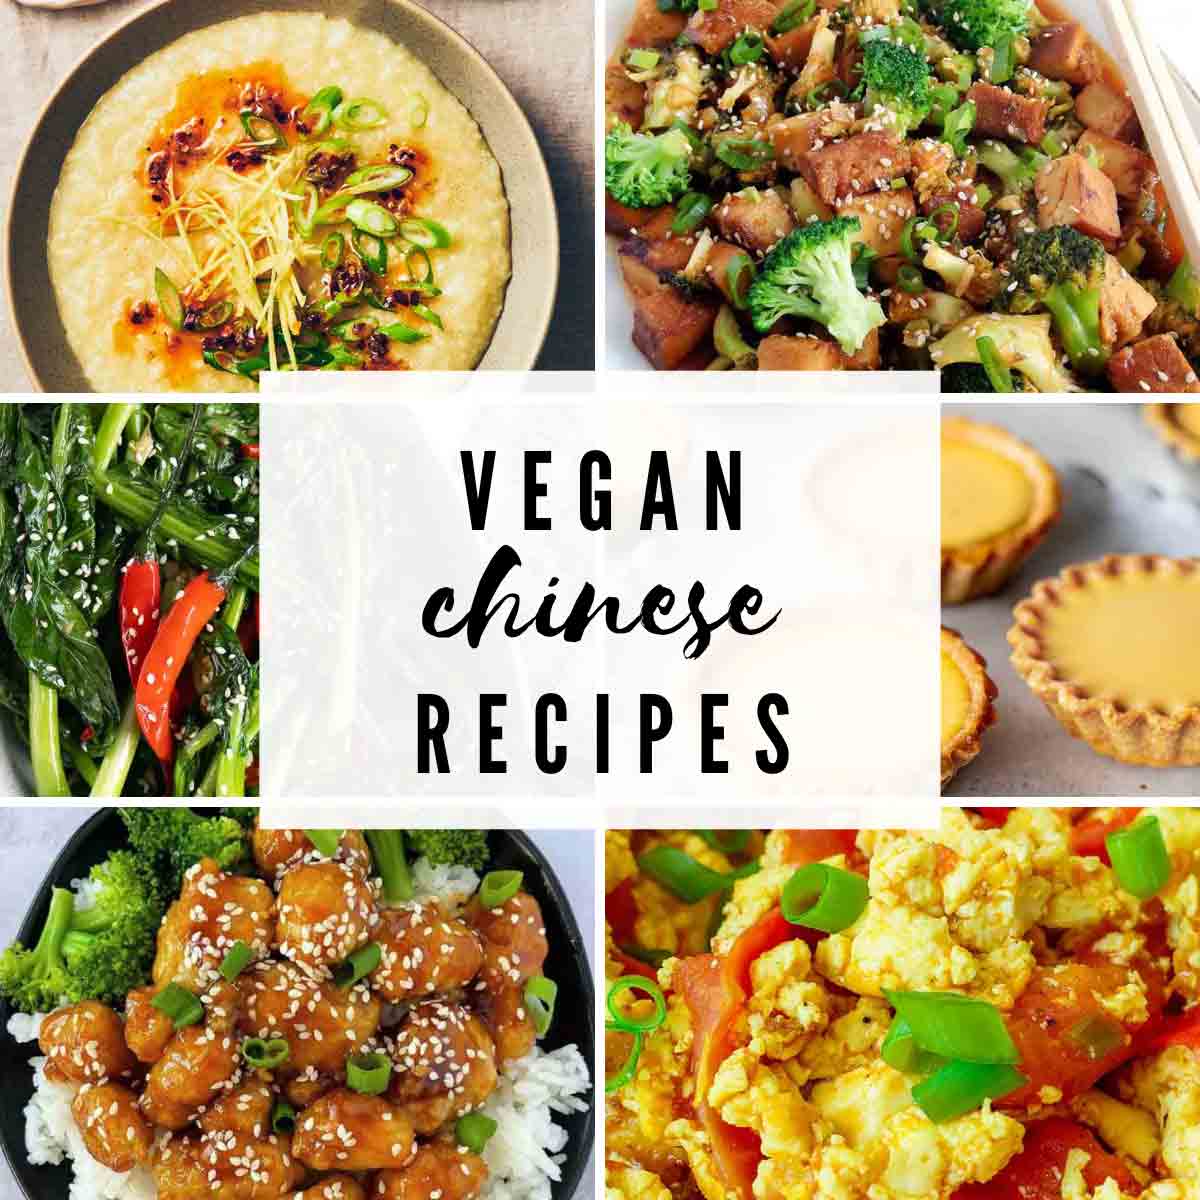 6 Food Images With Text Overlay That Reads 'vegan Chinese Recipes'